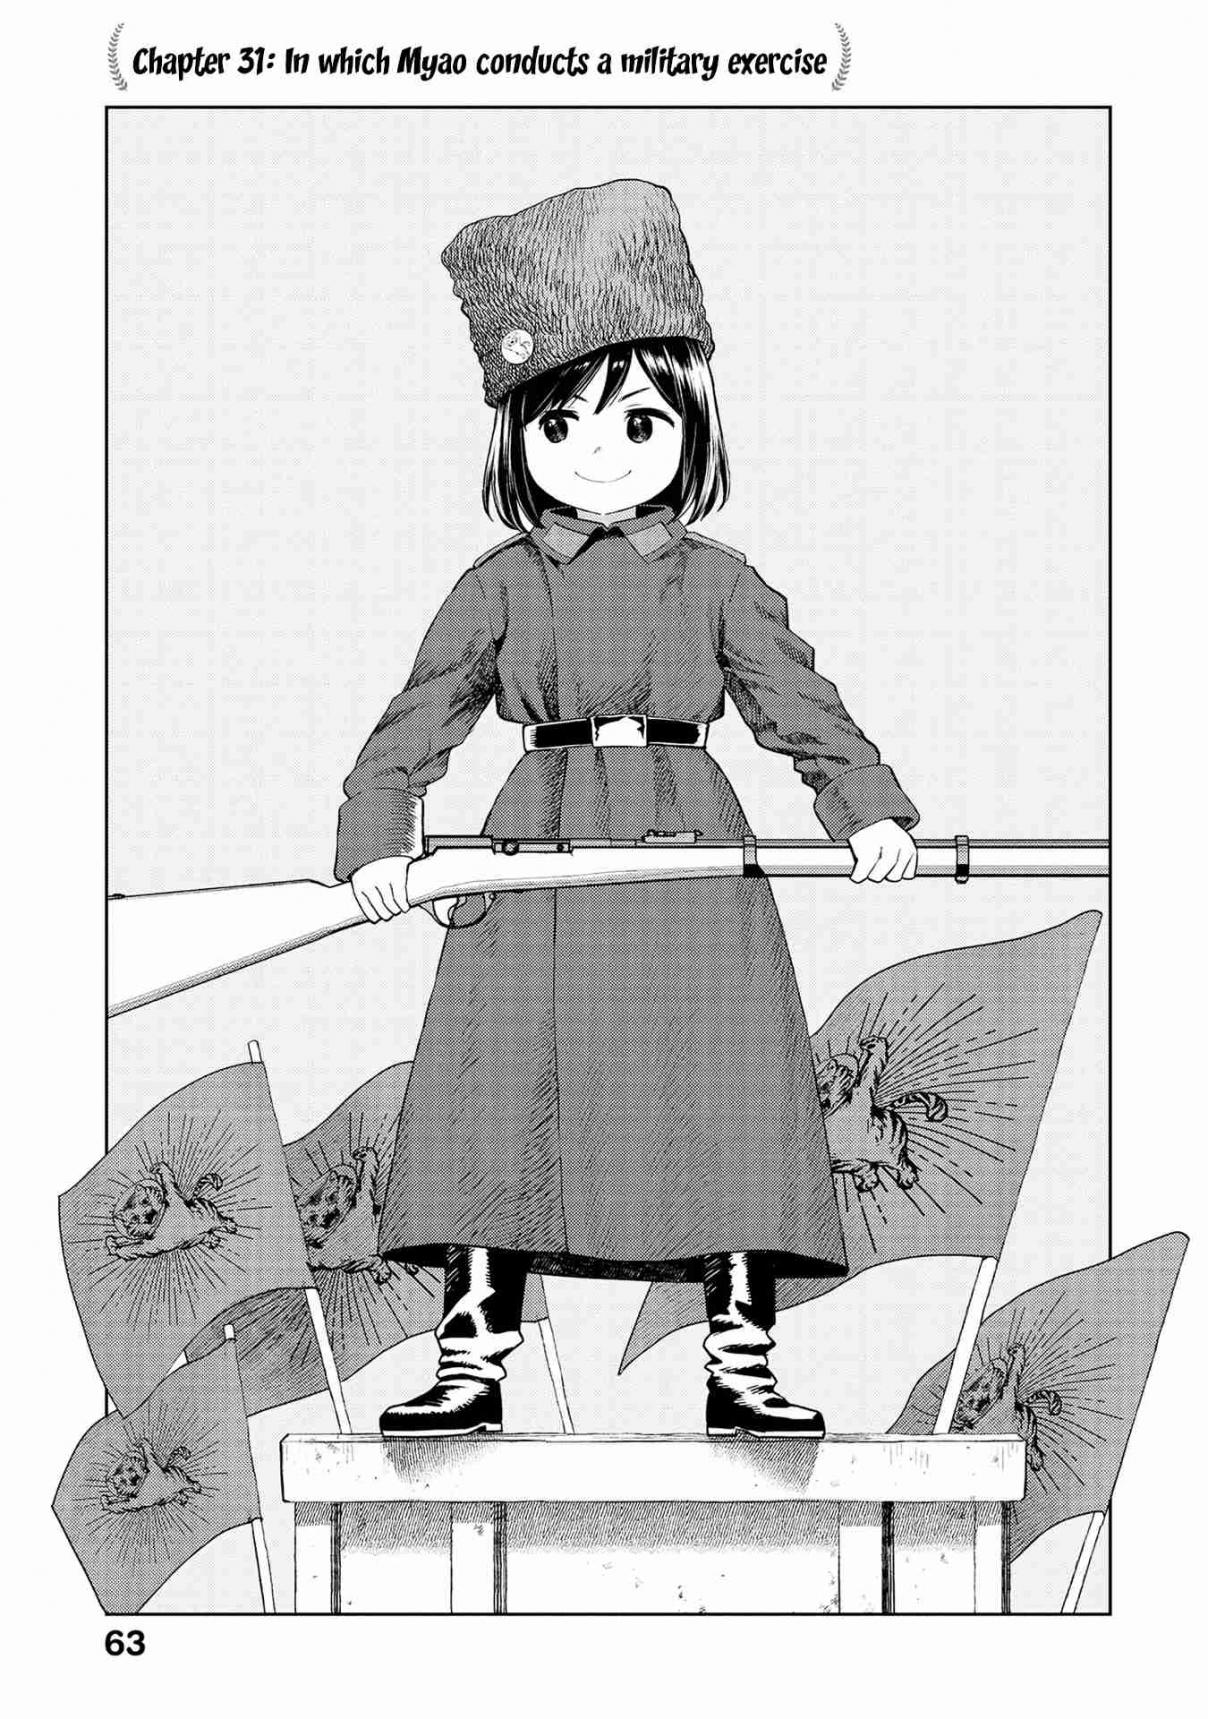 Oh, Our General Myao Vol. 3 Ch. 31 In which Myao conducts a military exercise